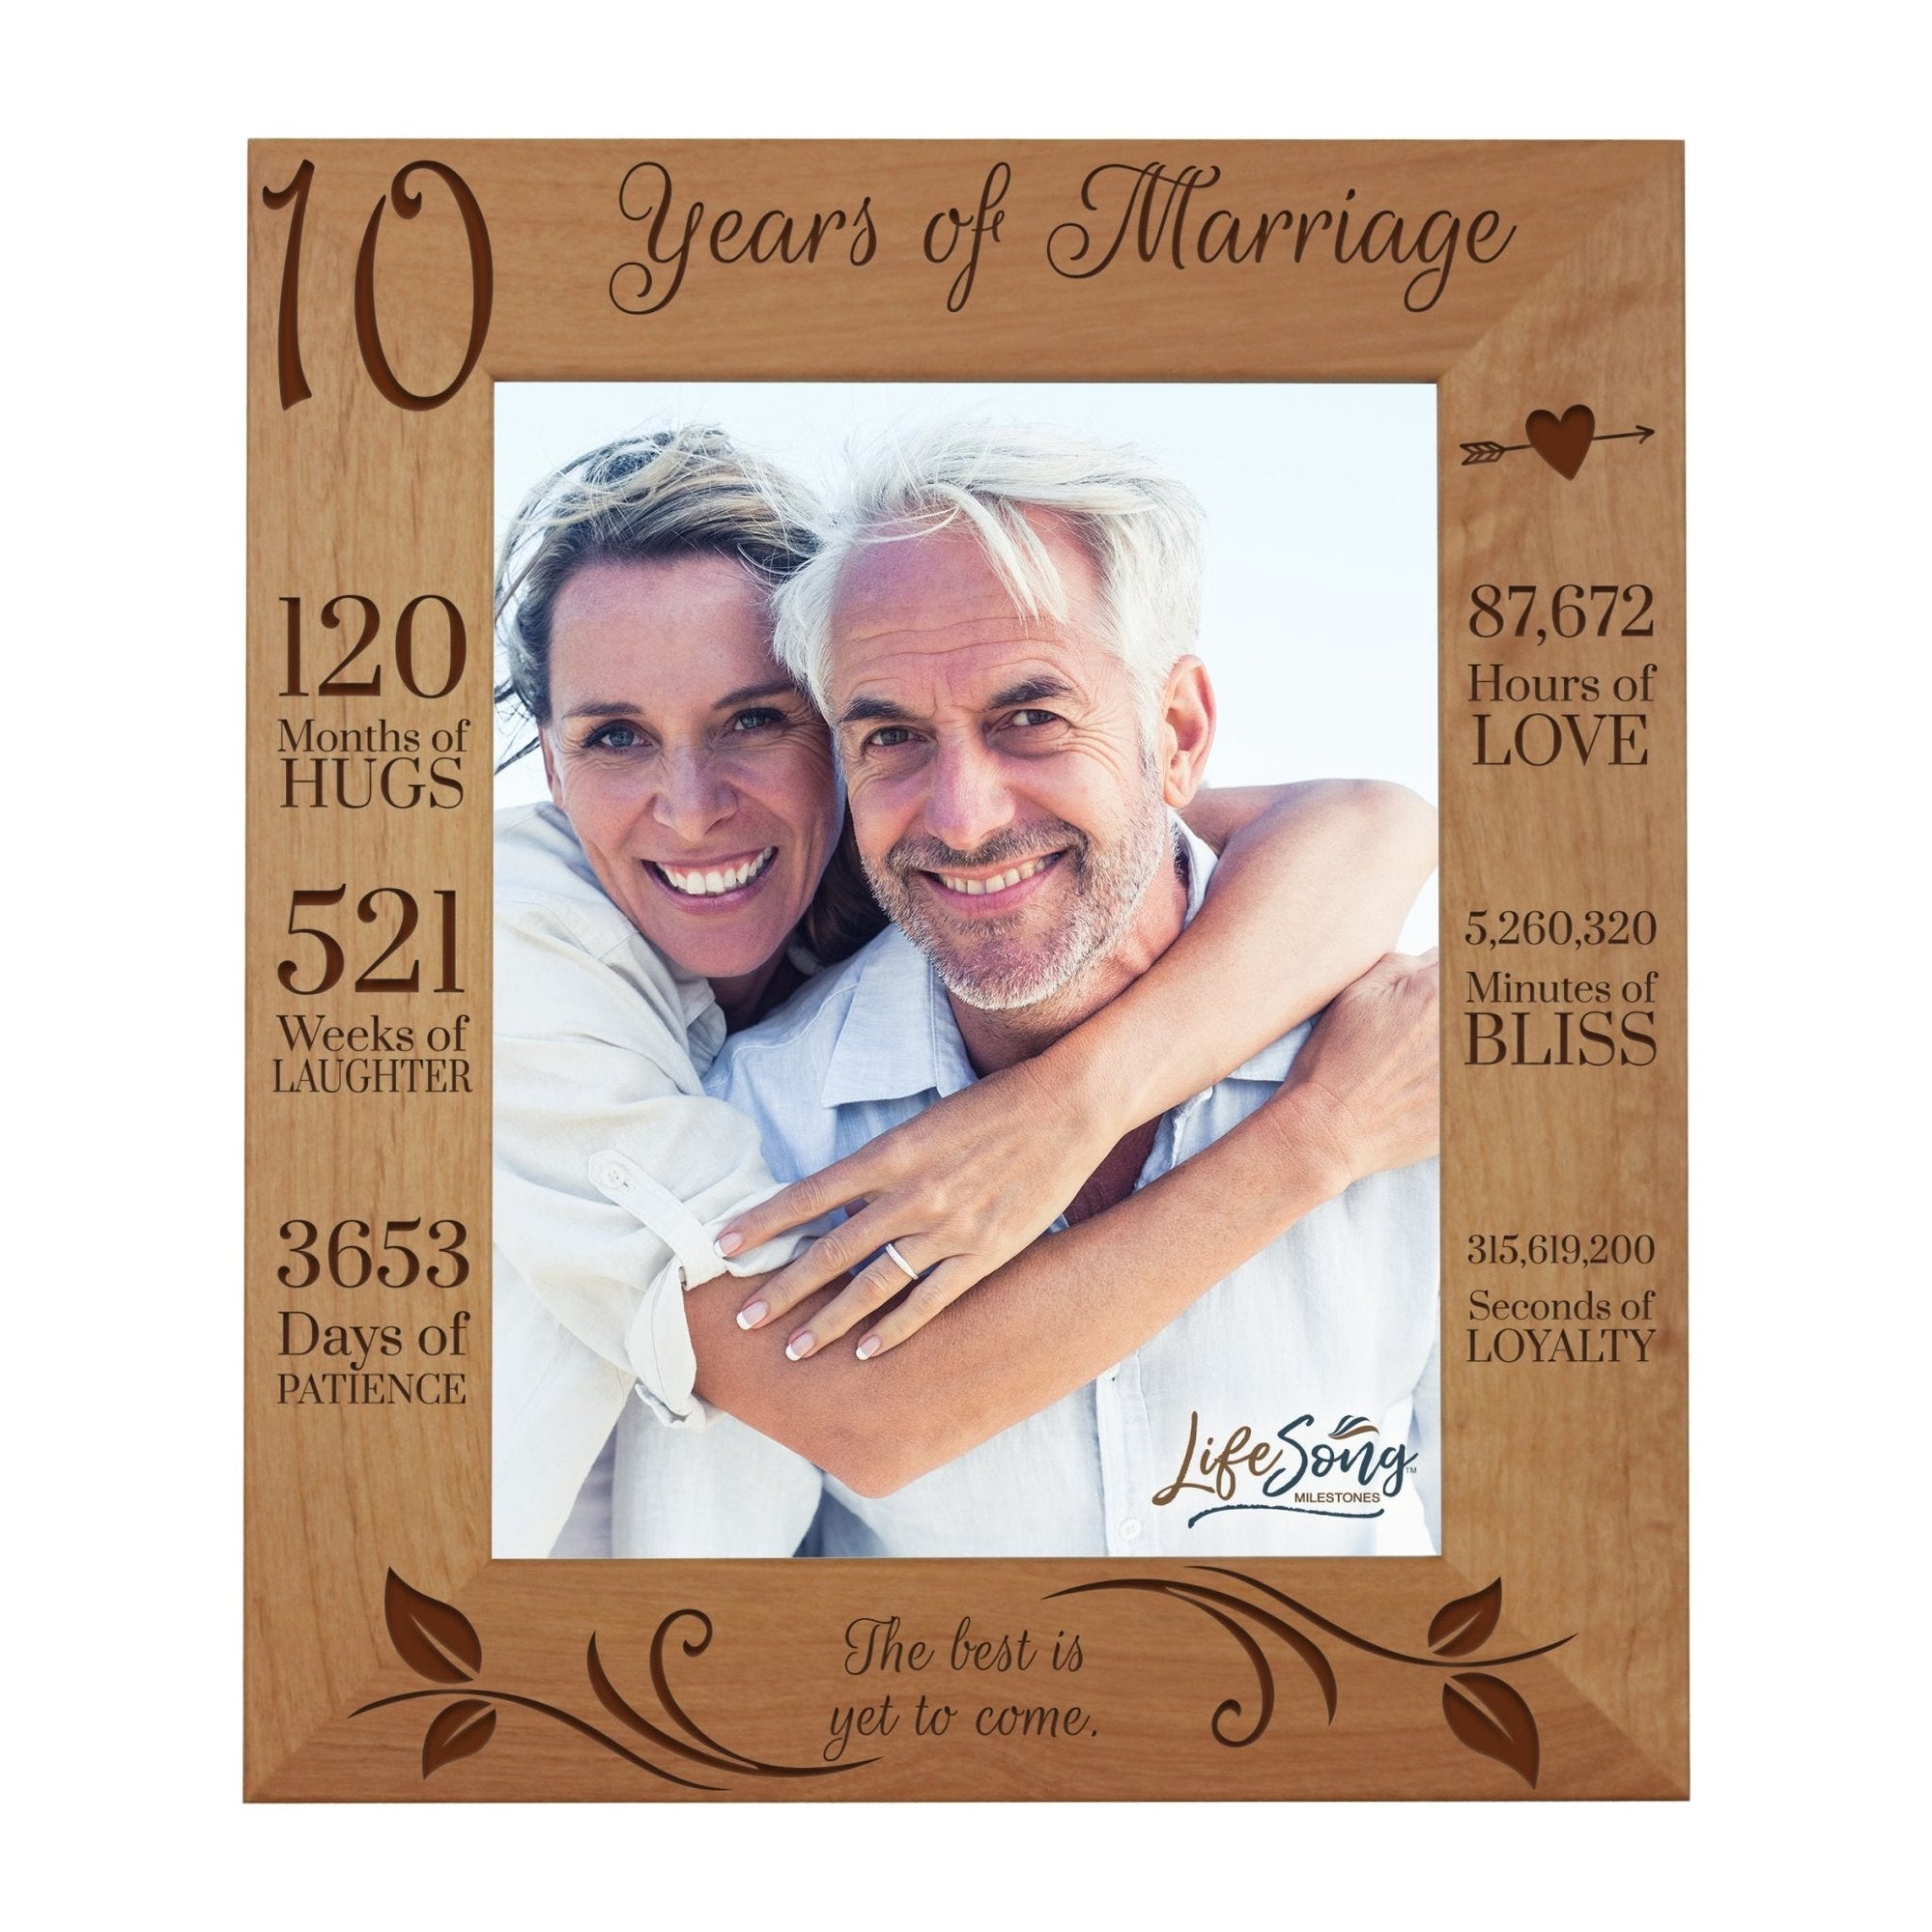 Couples 10th Wedding Anniversary Photo Frame Home Decor Gift Ideas - The Best Is Yet To Come - LifeSong Milestones